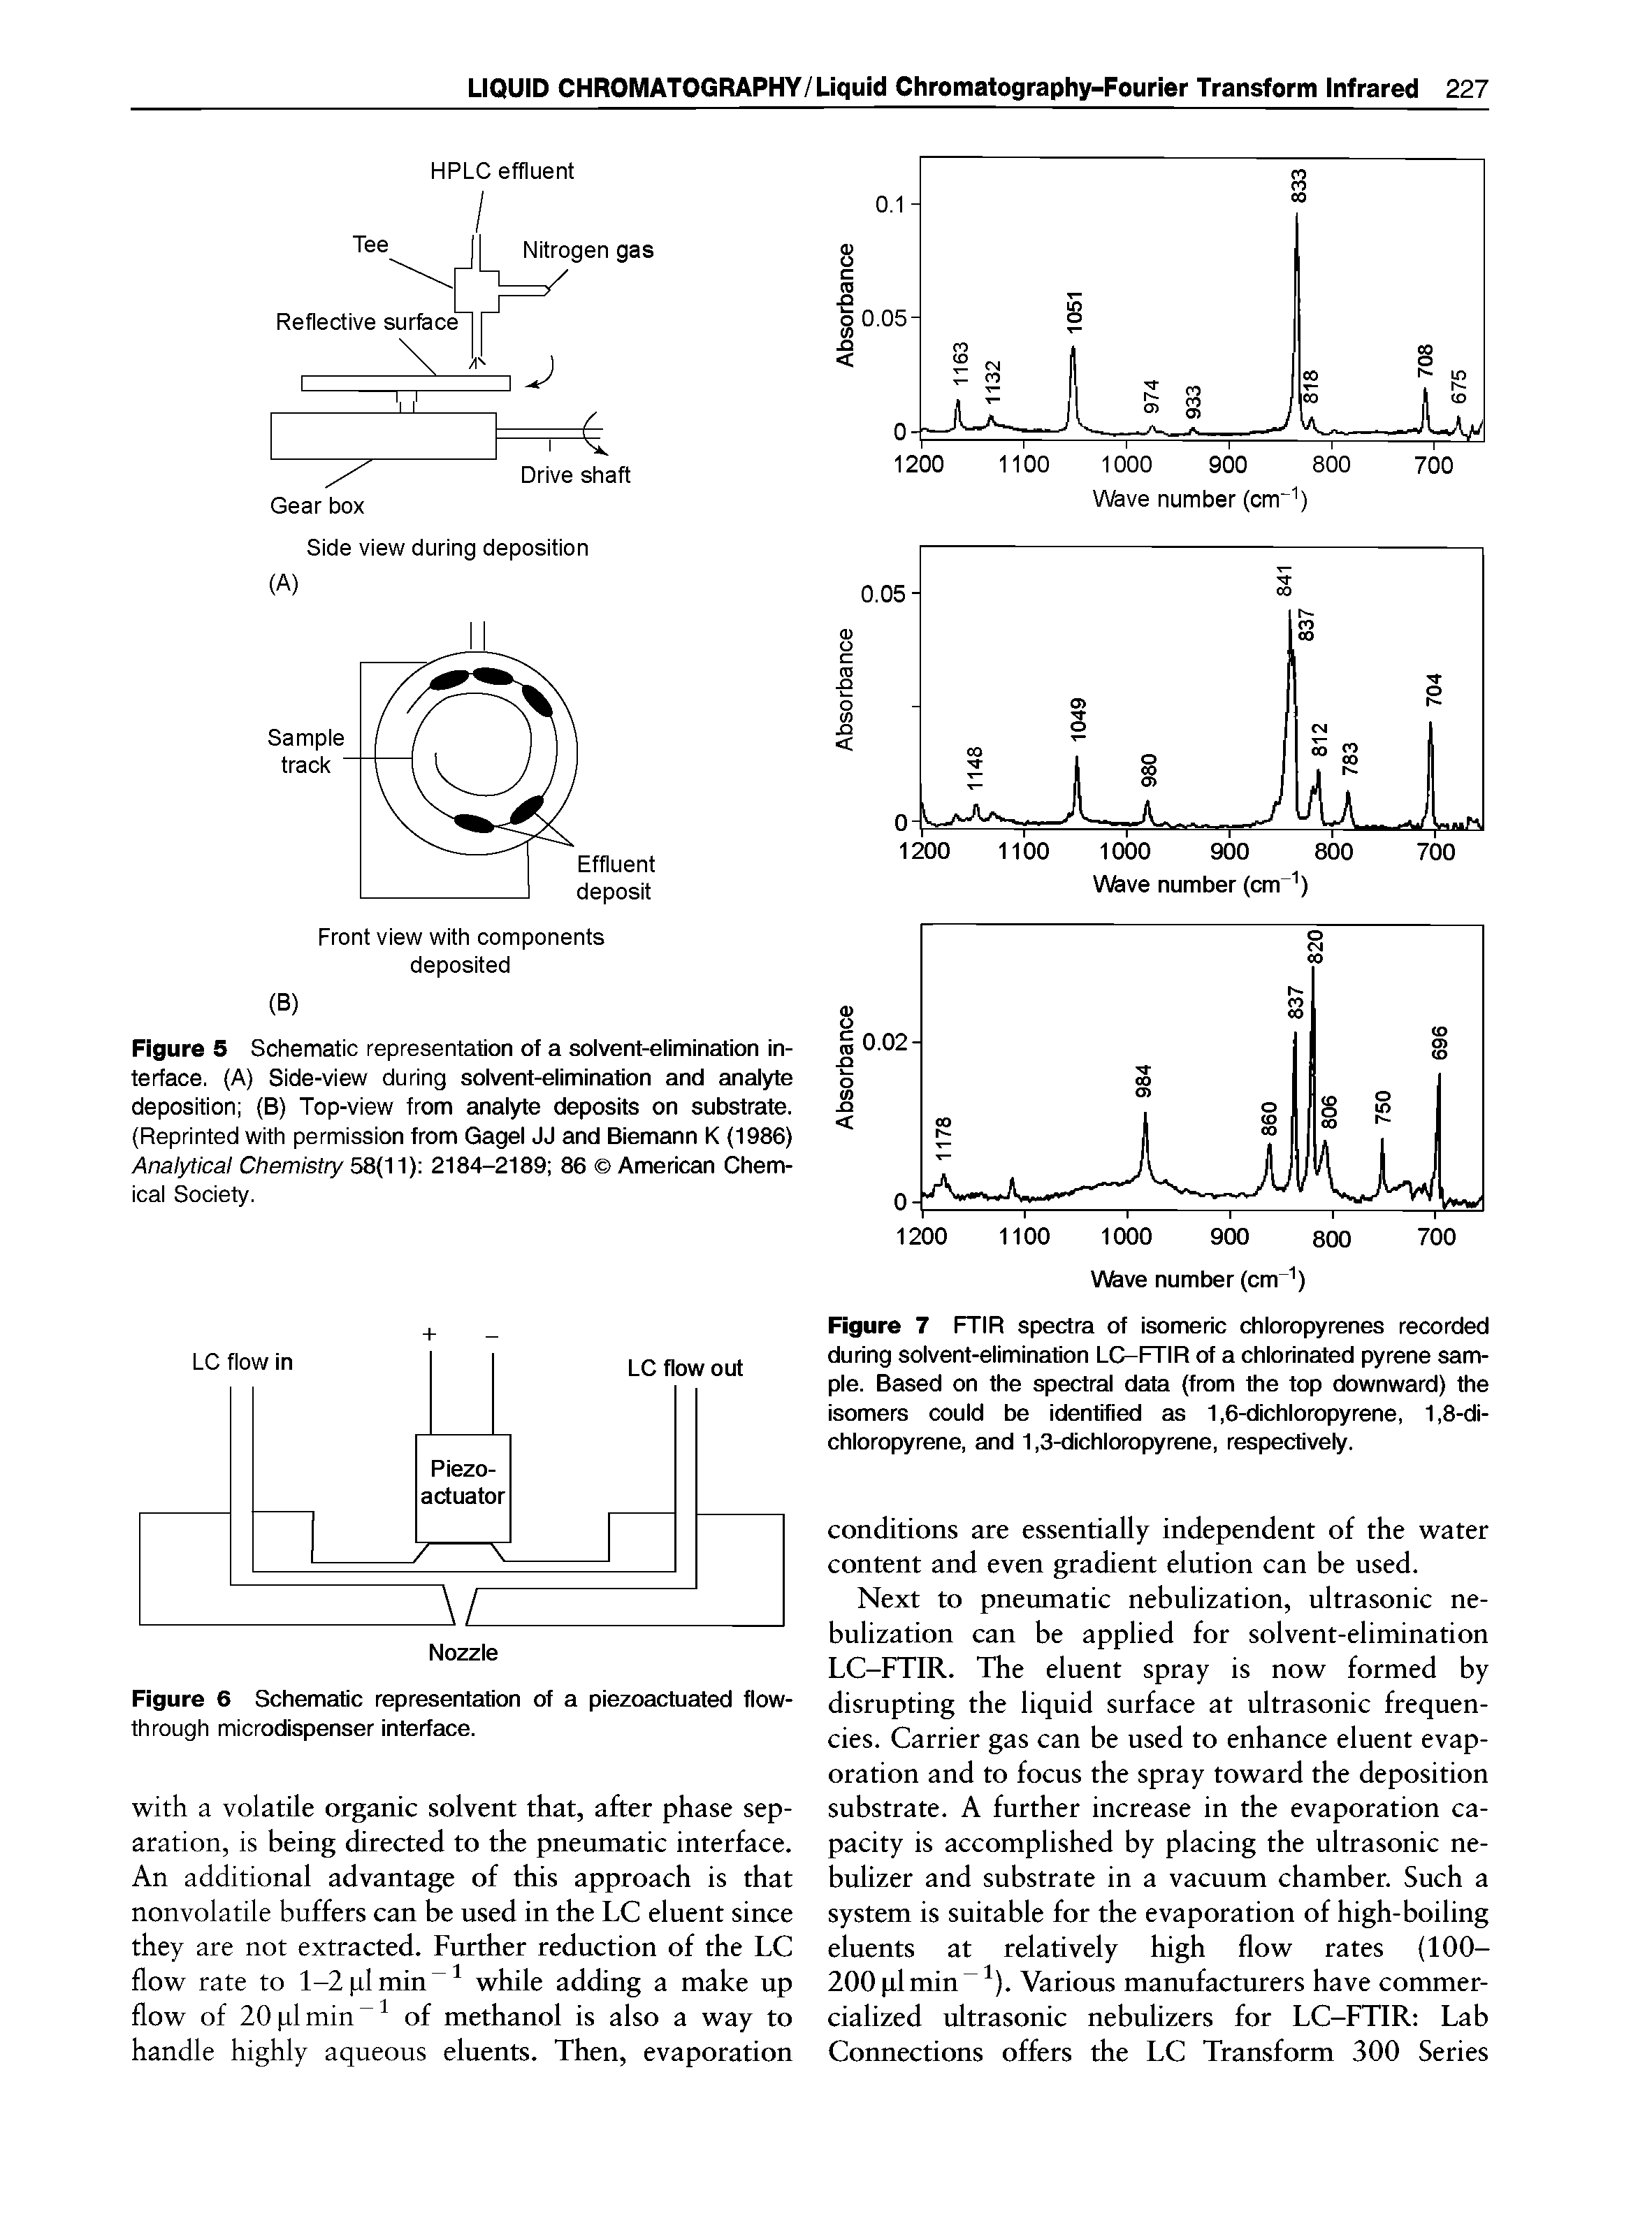 Figure 5 Schematic representation of a solvent-elimination interface. (A) Side-view during solvent-elimination and analyte deposition (B) Top-view from analyte deposits on substrate. (Reprinted with permission from Gagel JJ and Biemann K (1986) Analytical Chemistry 58(11) 2184-2189 86 American Chemical Society.